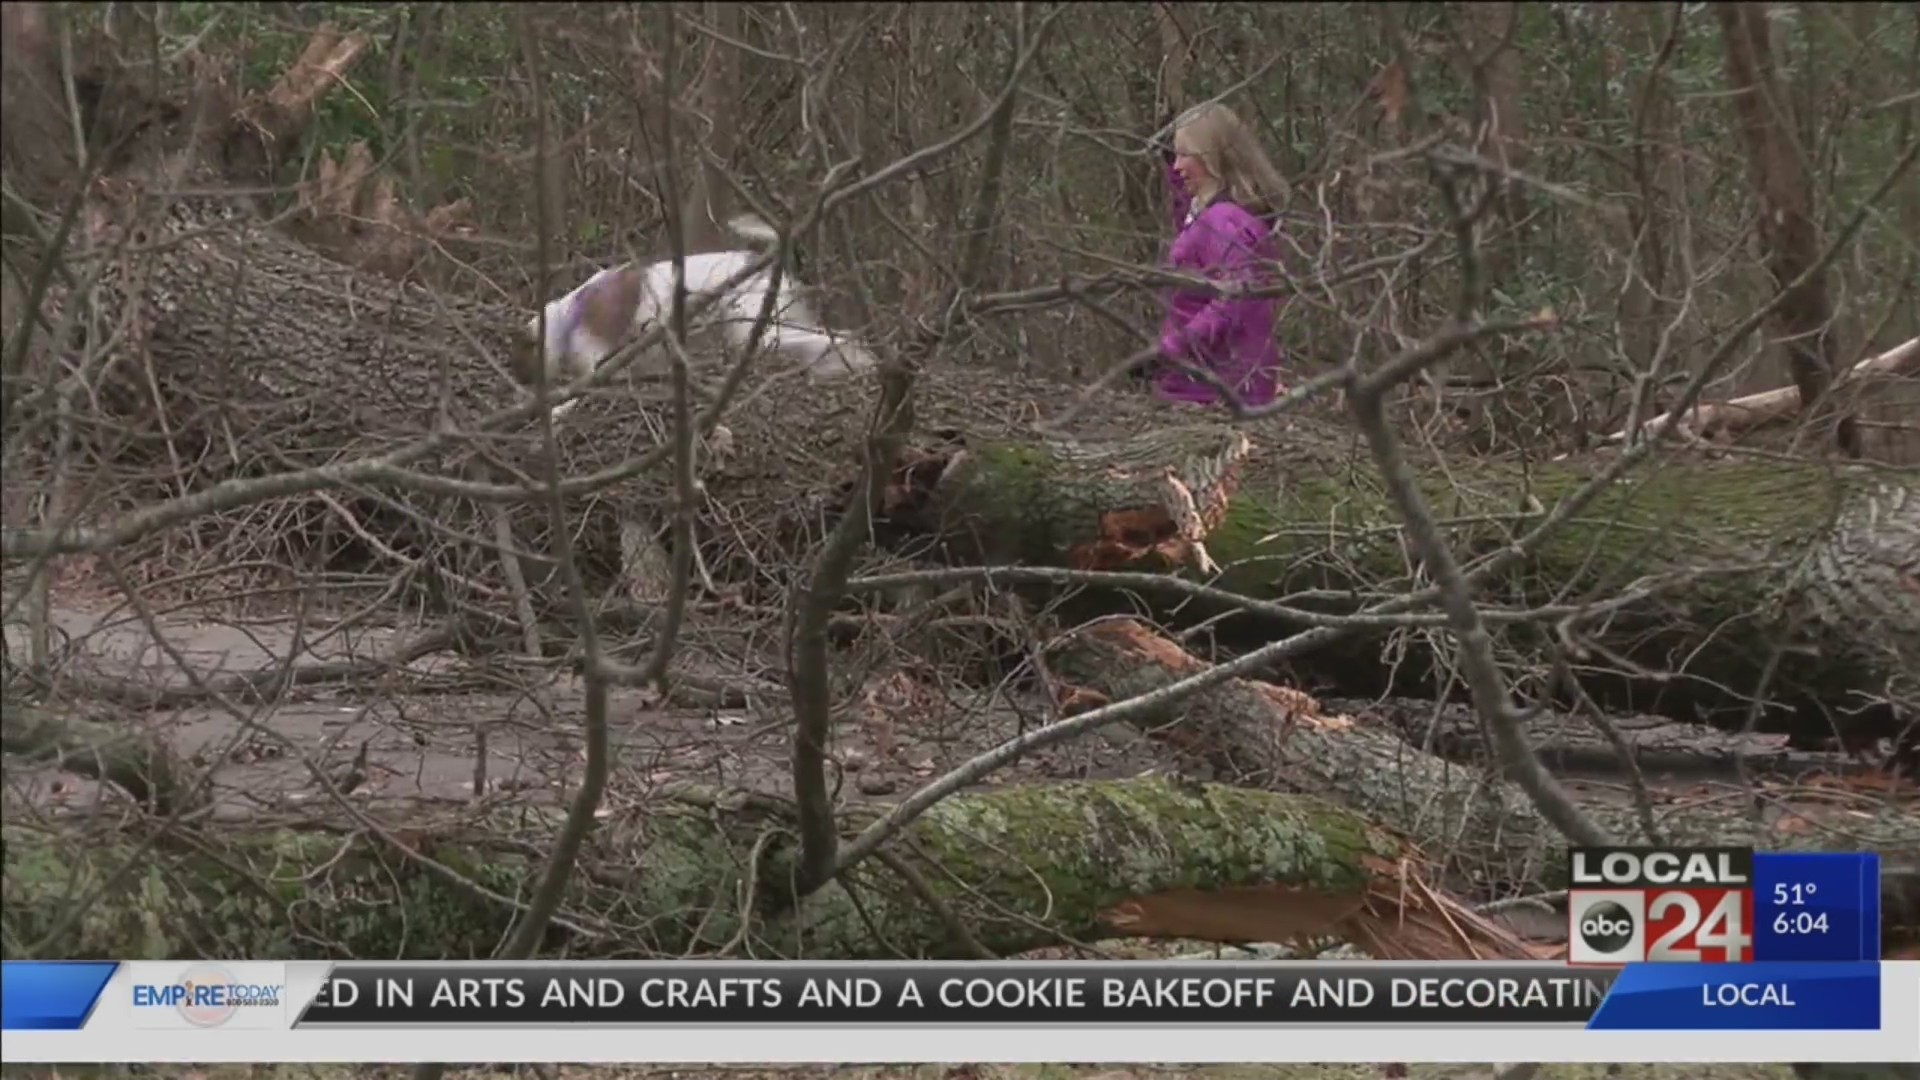 Overton Park Conservancy is asking for donations to help pay cost of cleanup after weekend storms